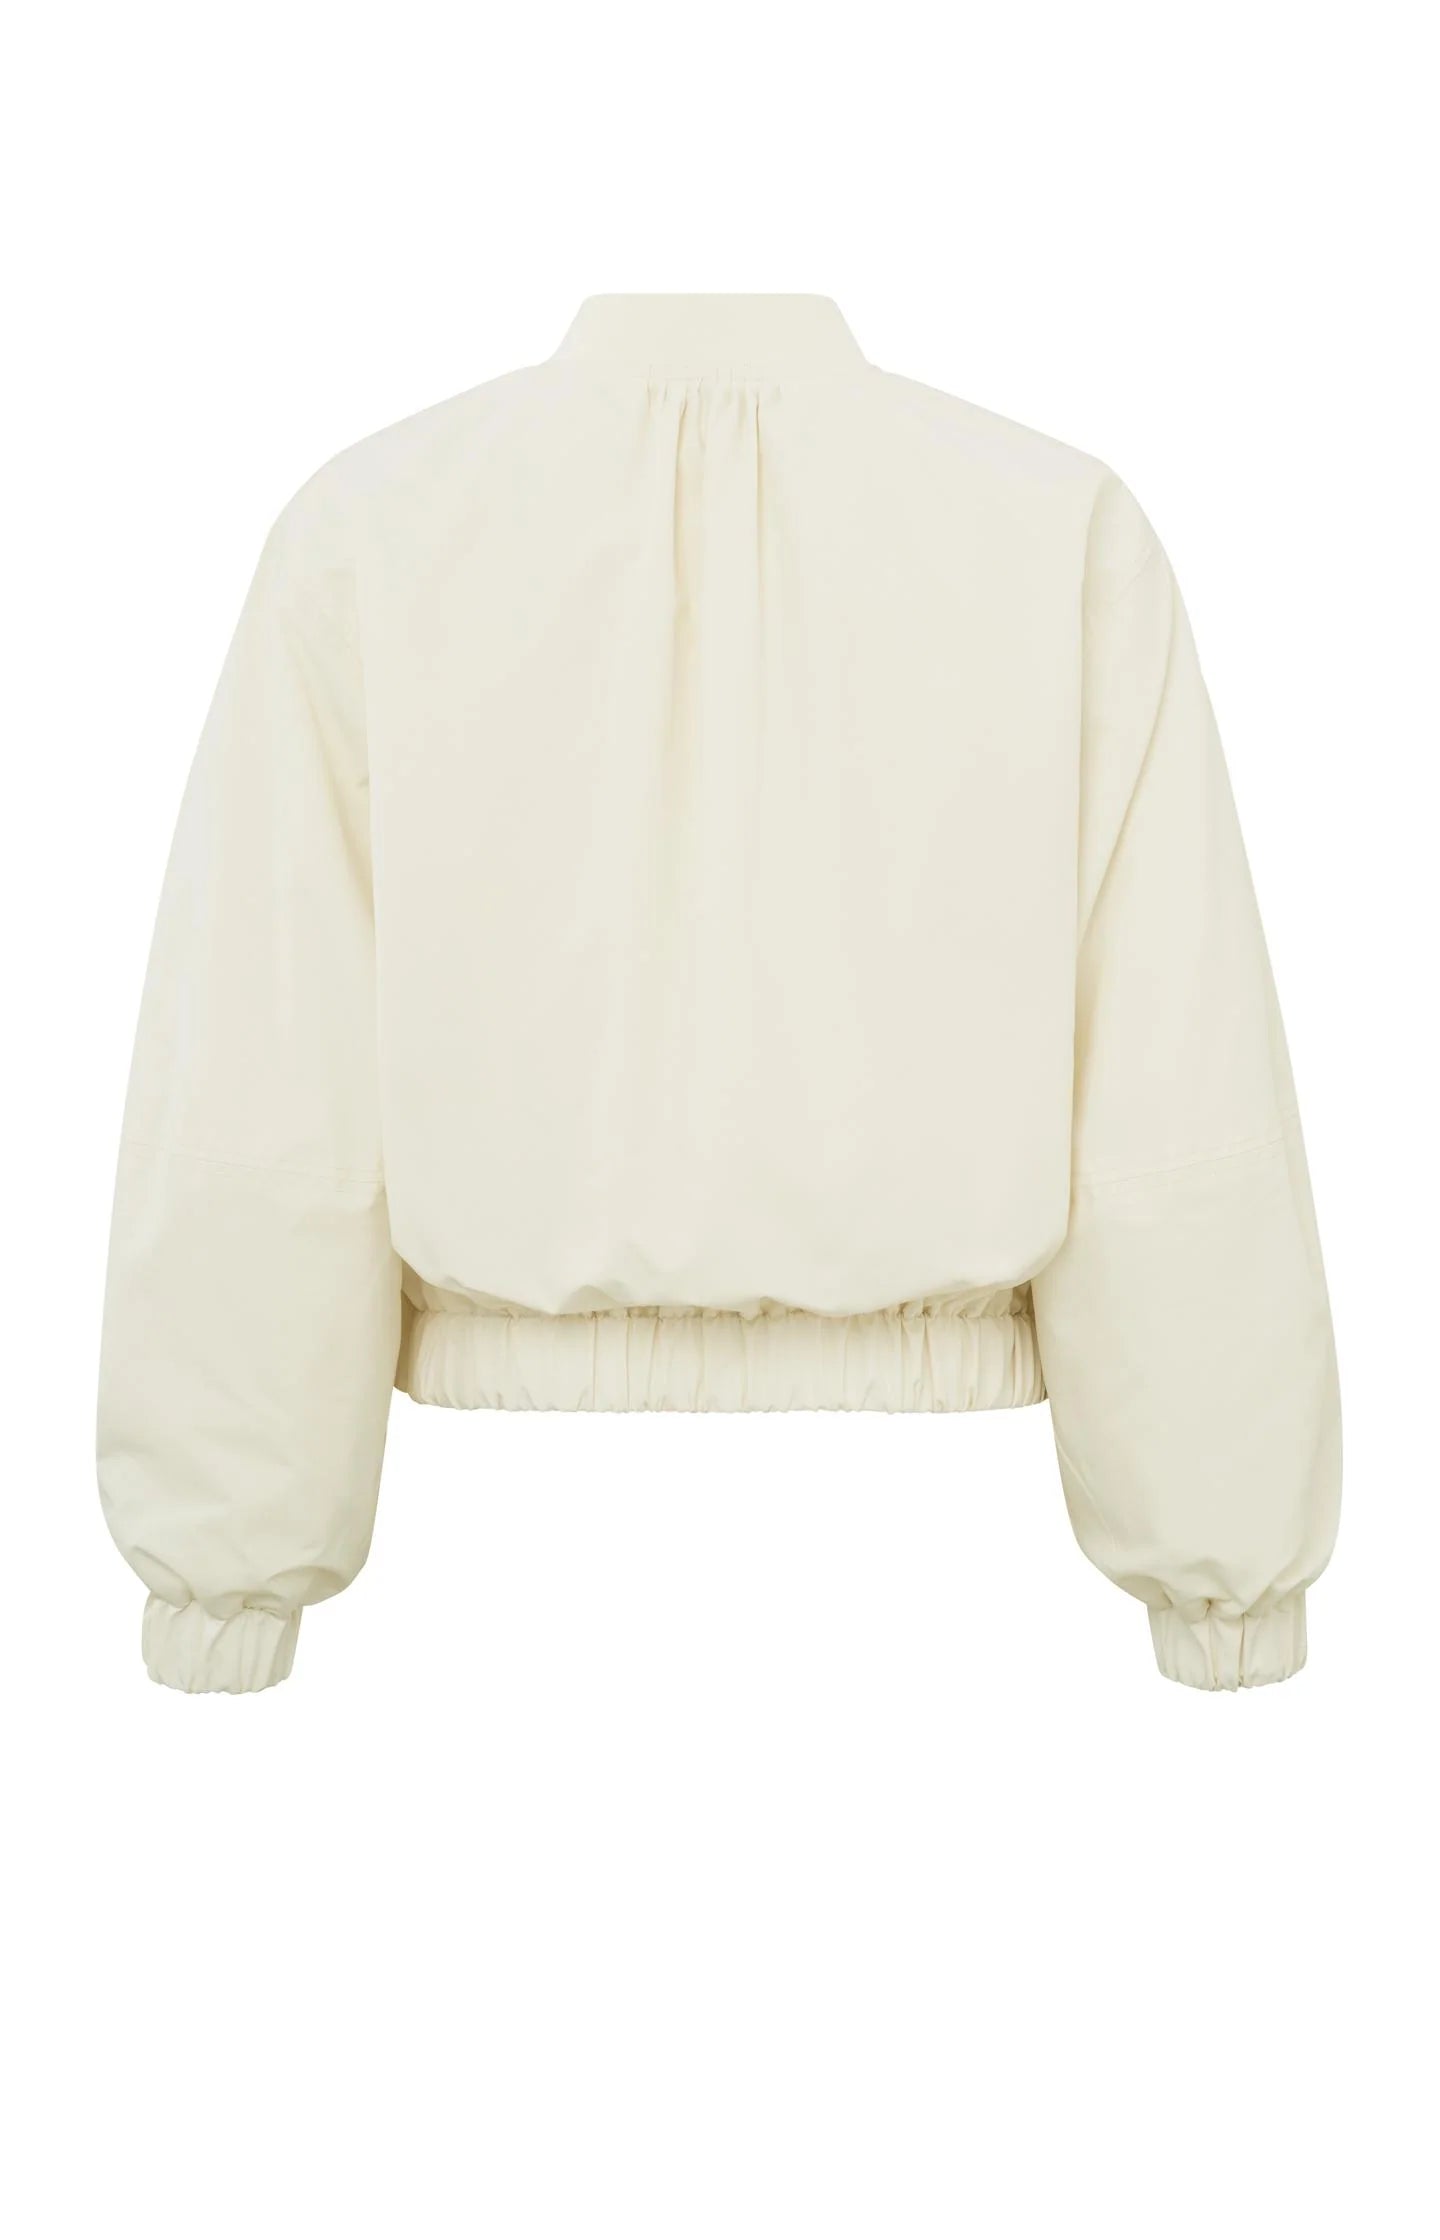 Woven Bomber Jacket in Wool White